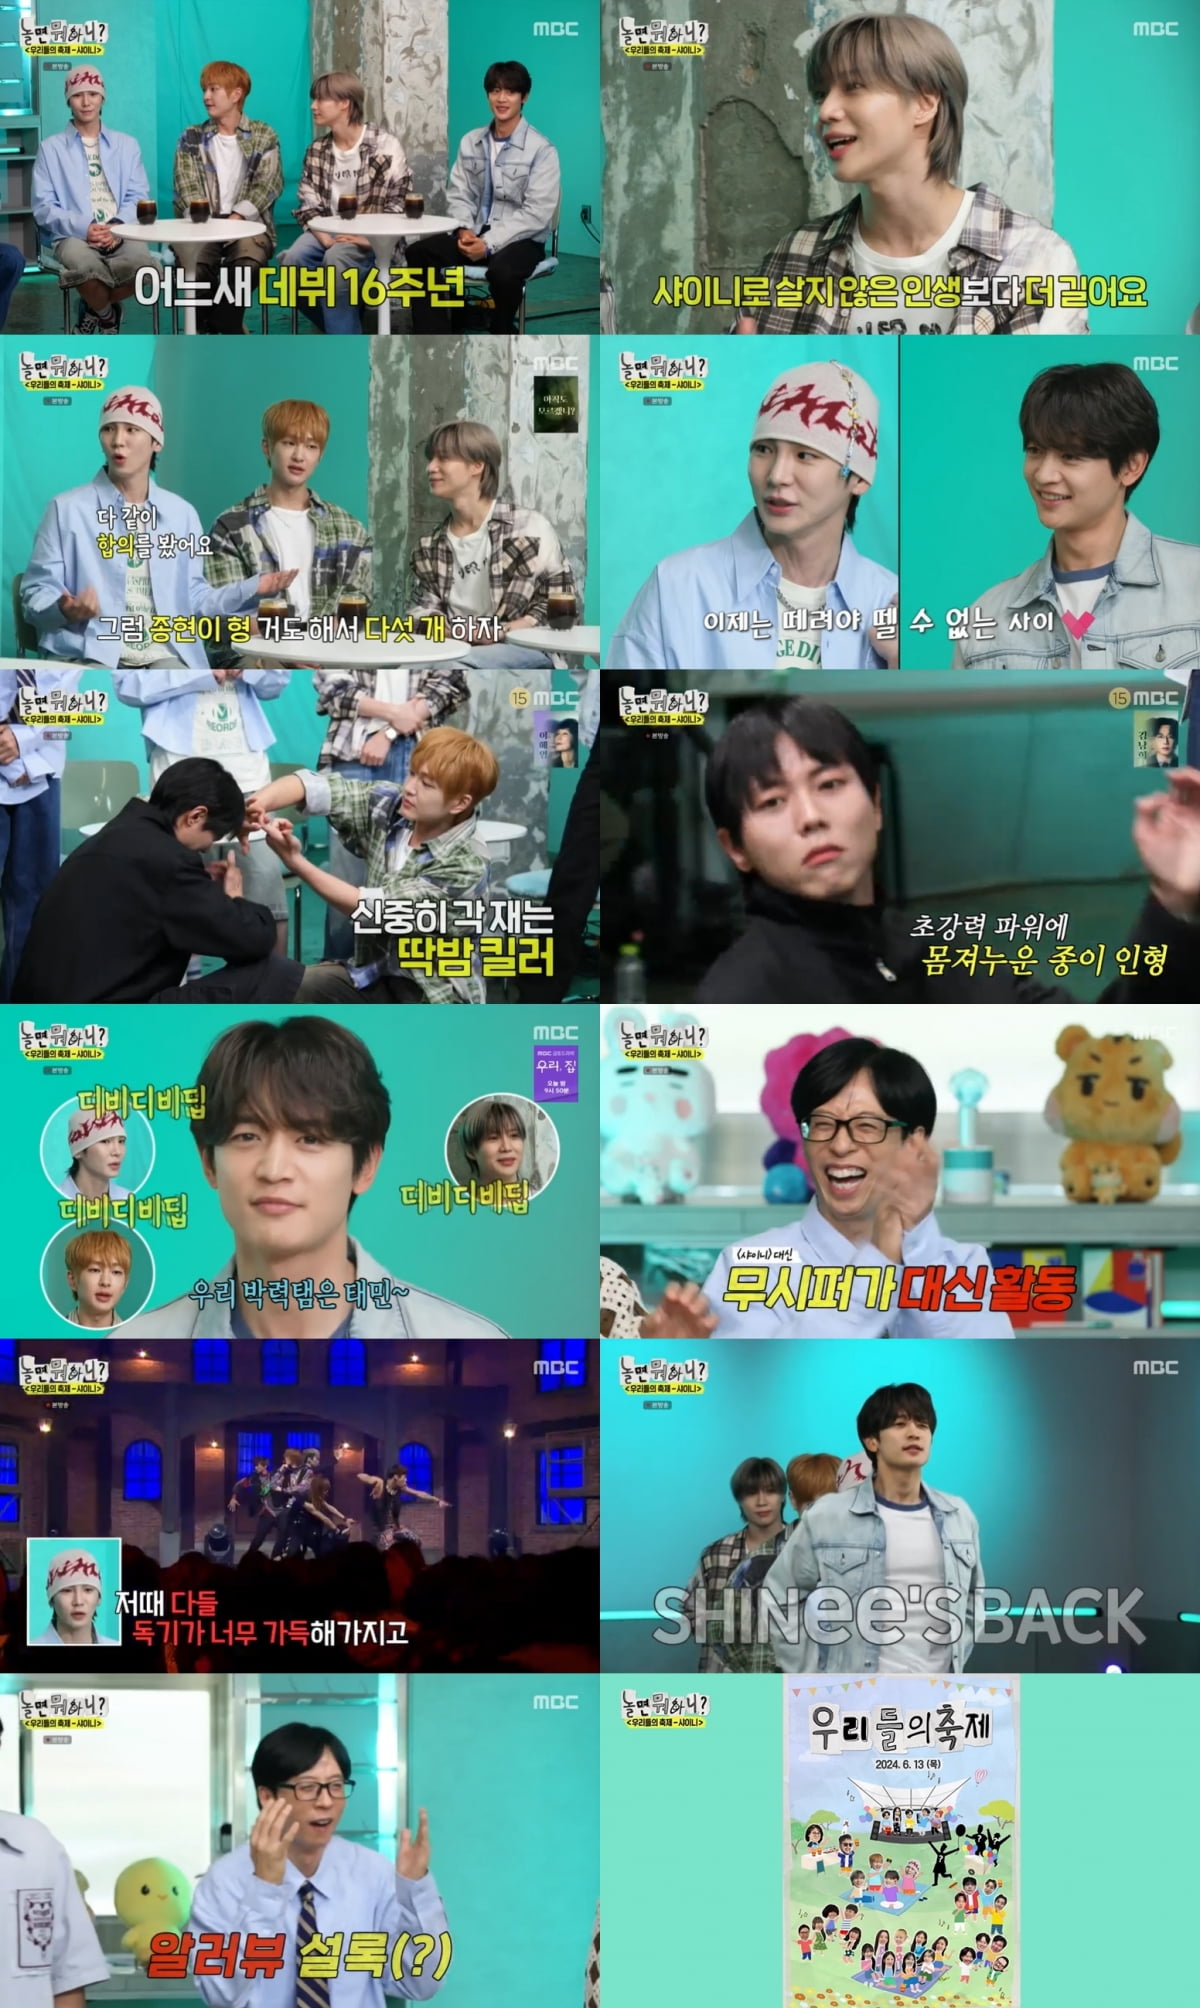 SHINee, friendship ring for 16th anniversary of debut with late Jonghyun → Behind the scenes of ‘Lucifer’